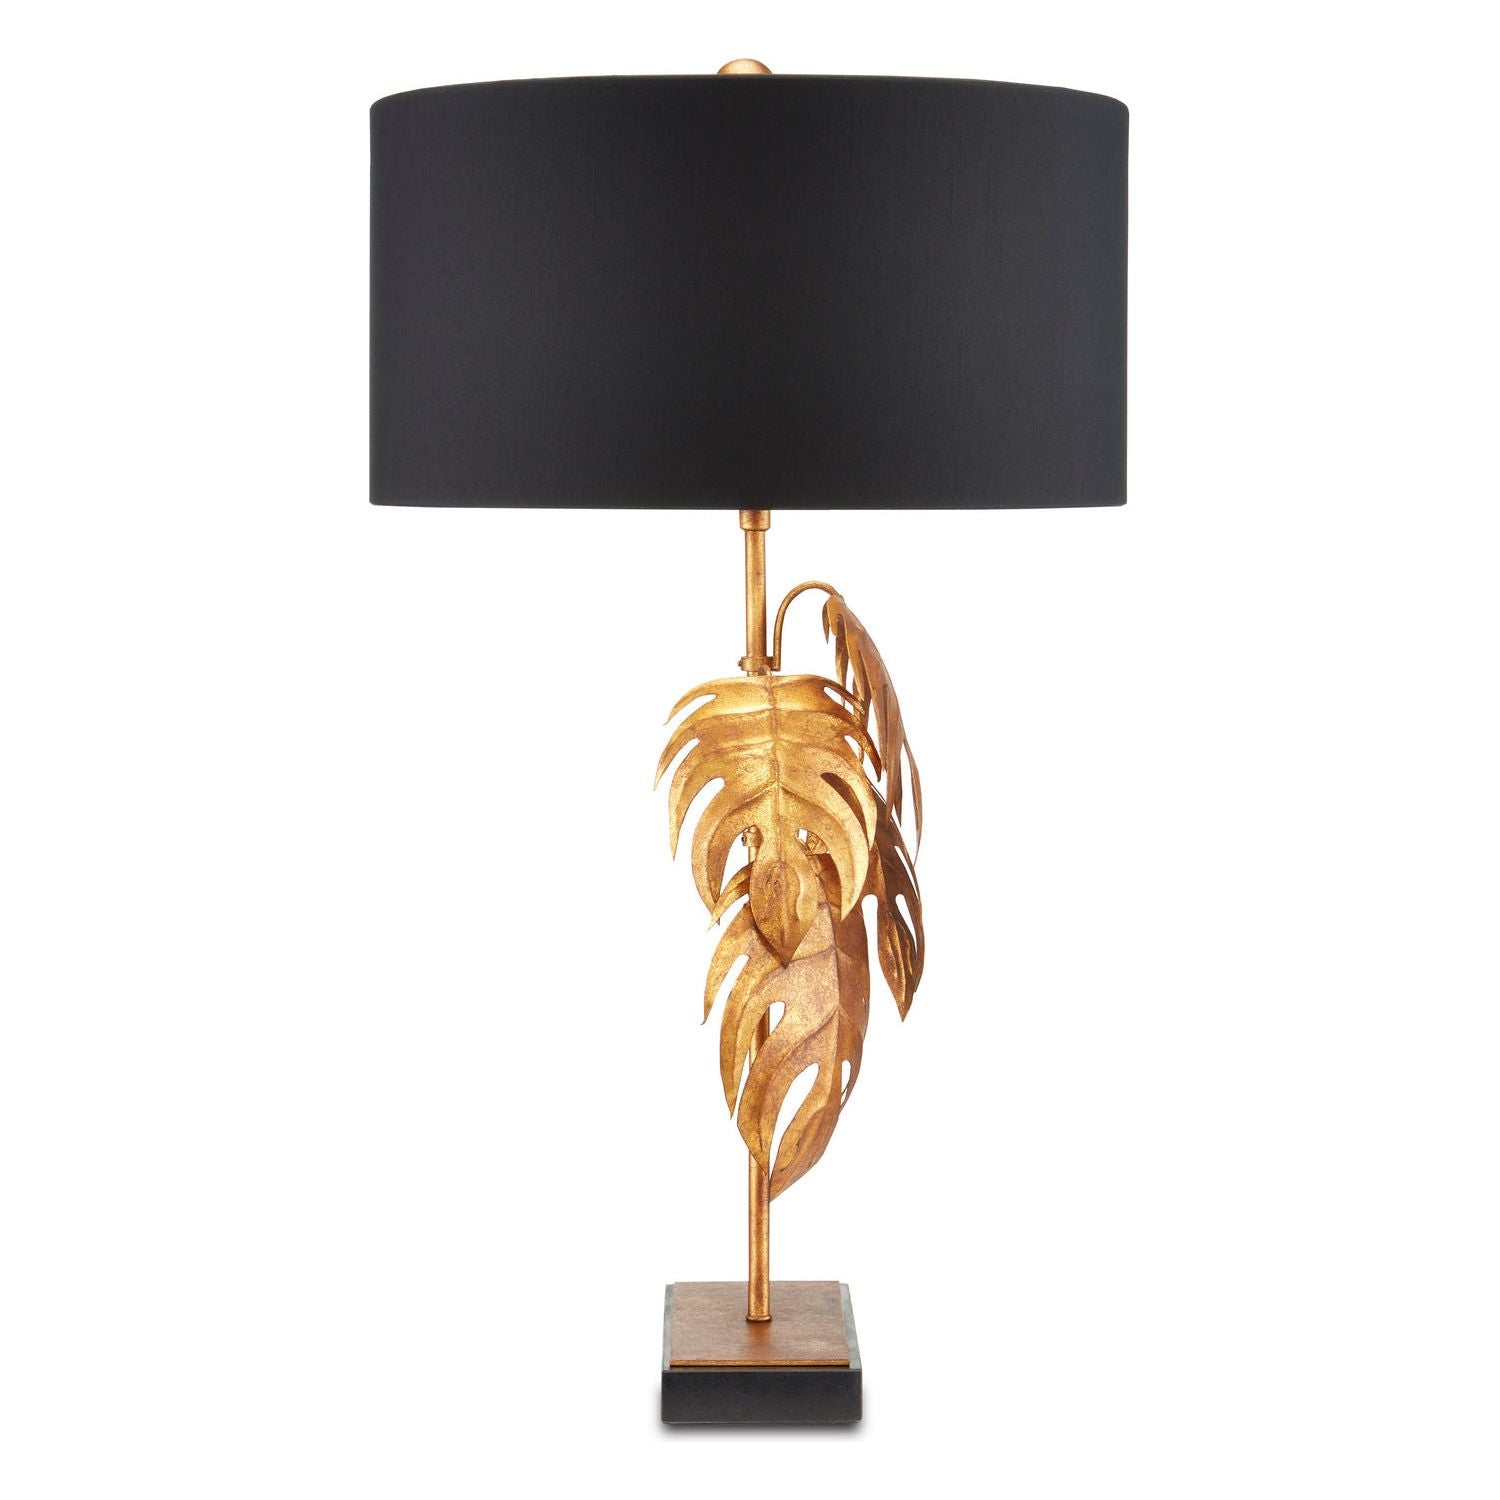 Irvin Table Lamp